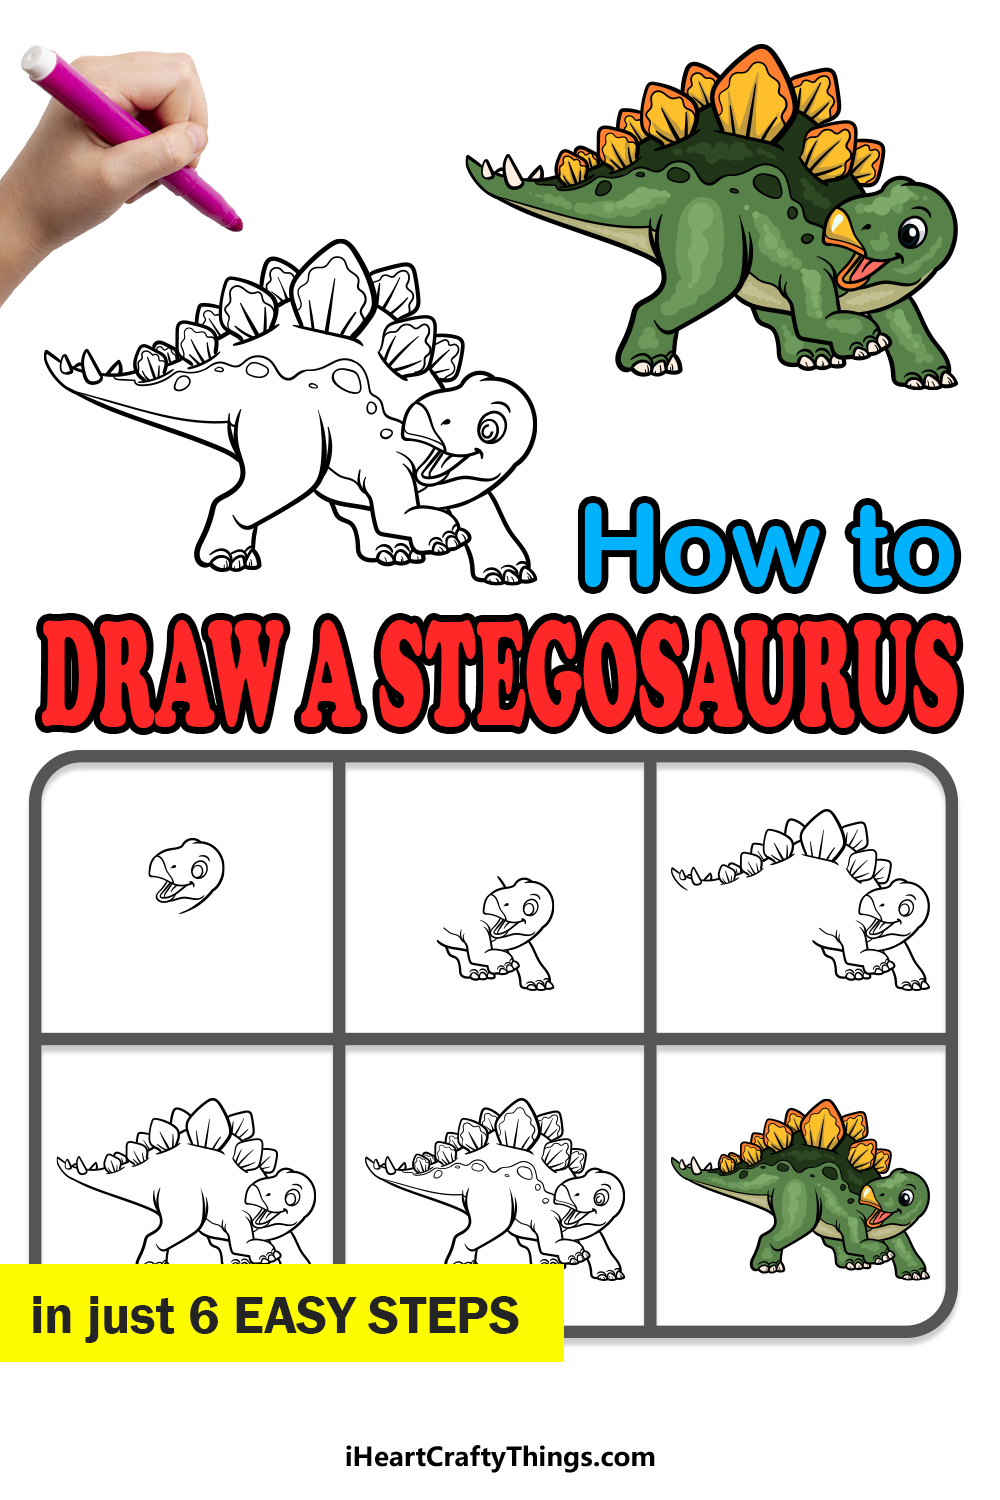 how to draw a Stegosaurus in 6 easy steps